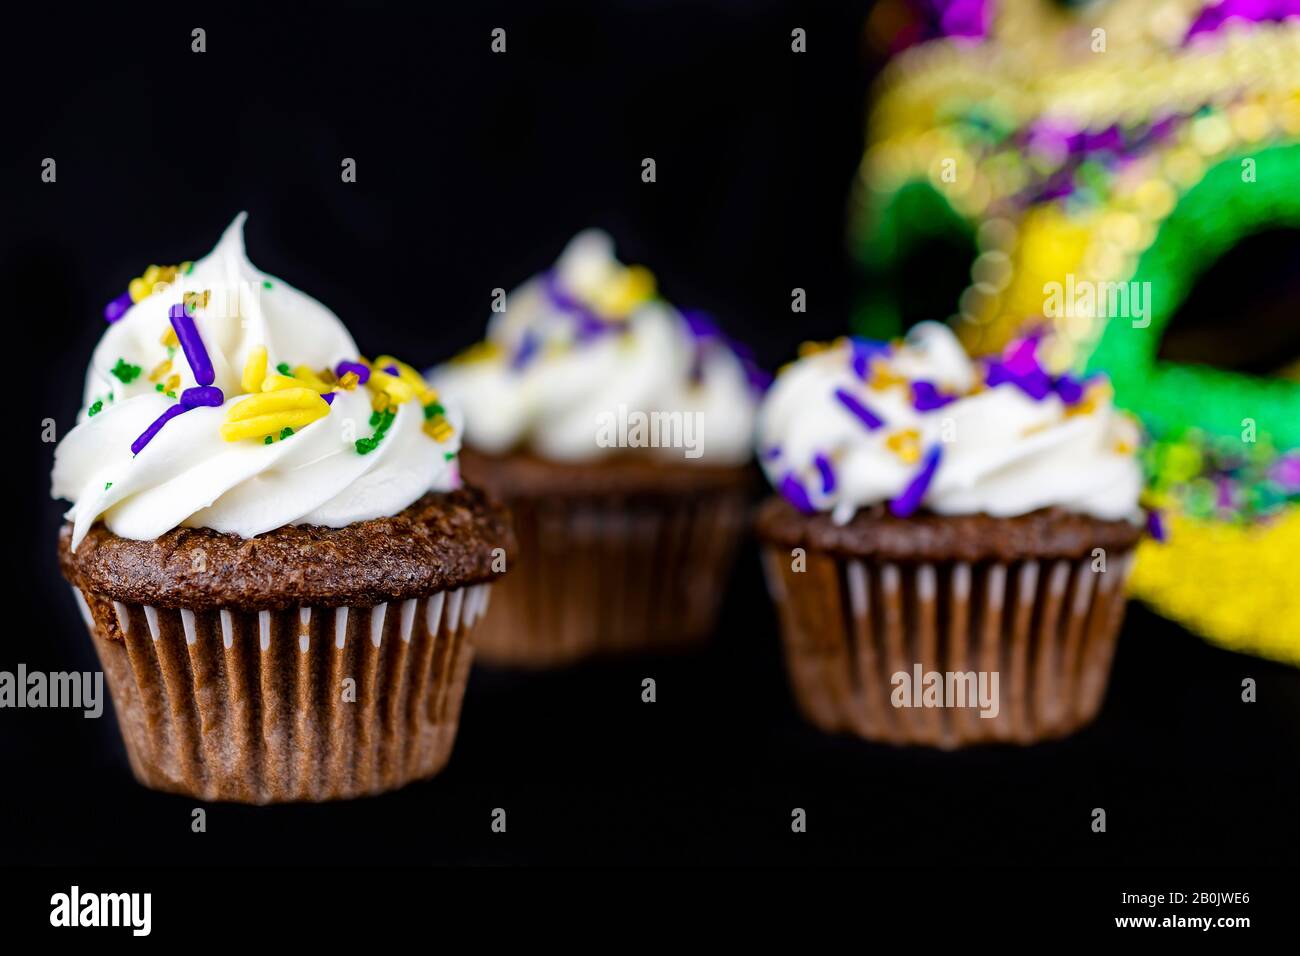 Three miniature cupcakes on a black background with a mask blurred in the background.  Shallow depth of field. Stock Photo